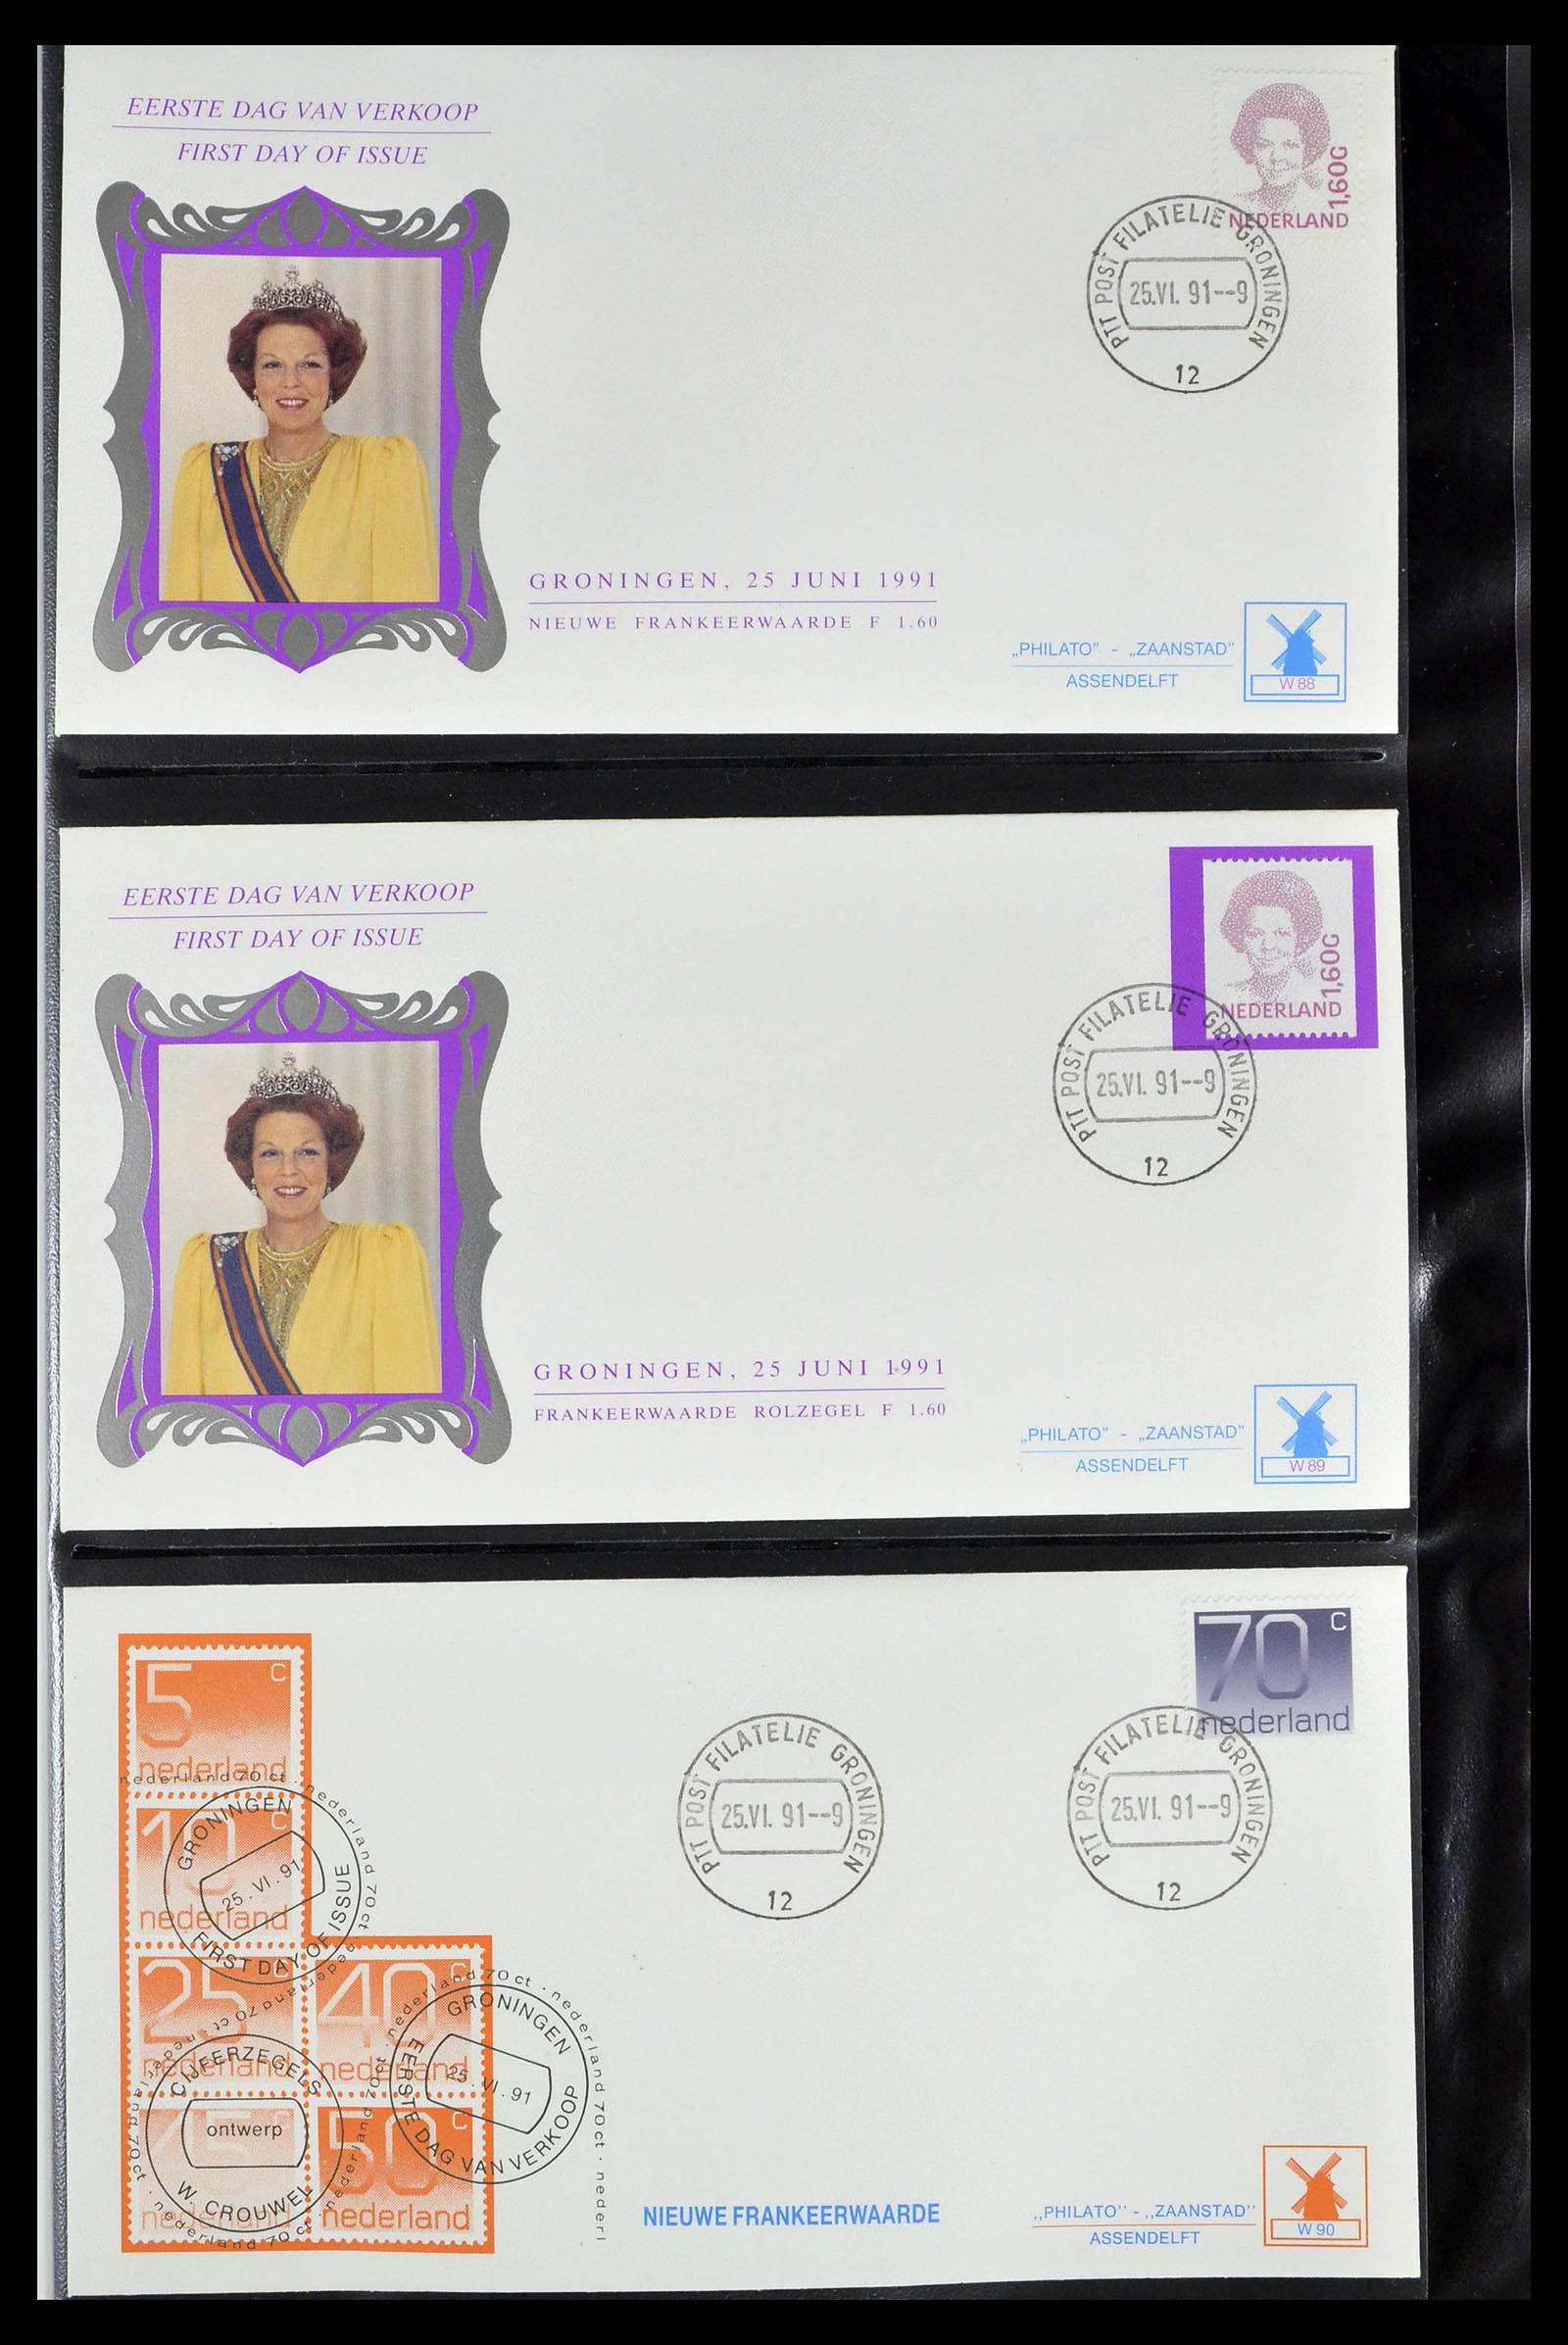 38559 0524 - Stamp collection 38559 Netherlands special first day covers.